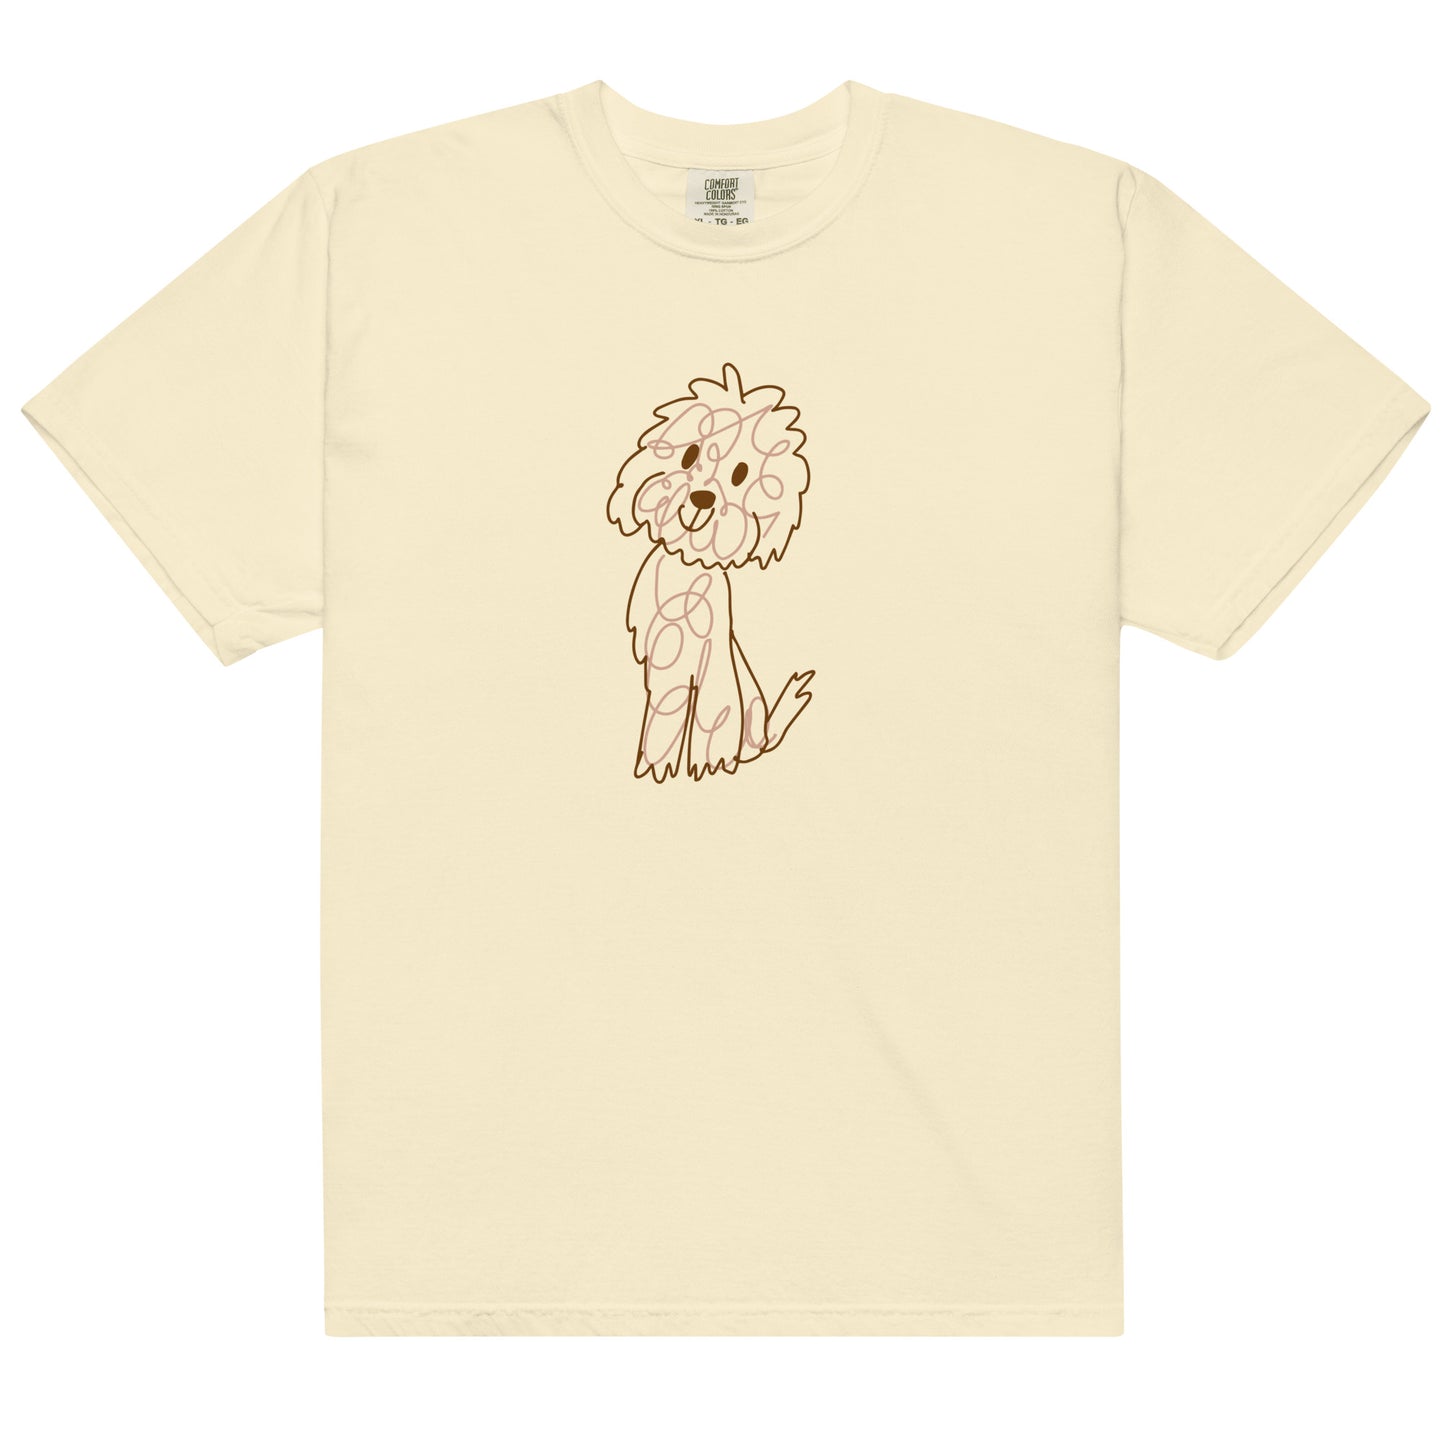 Comfort colors t-shirt with doodle dog drawn with fine lines ivory color